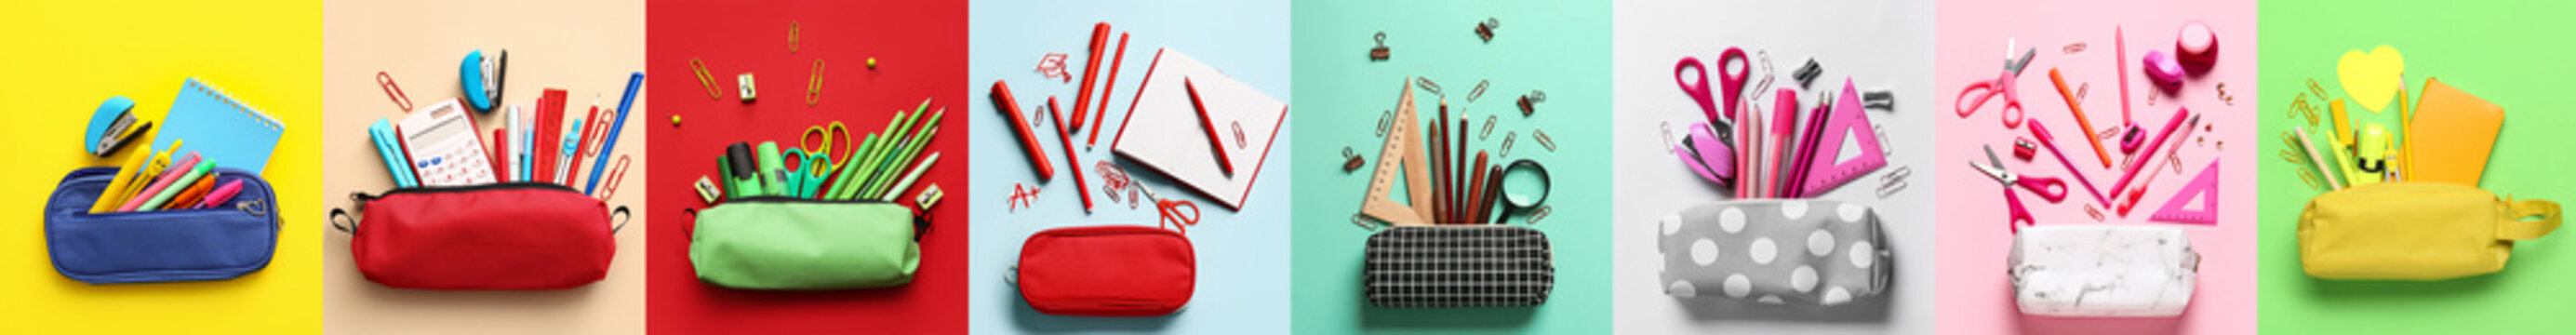 Set of pencil cases with stationery on colorful background